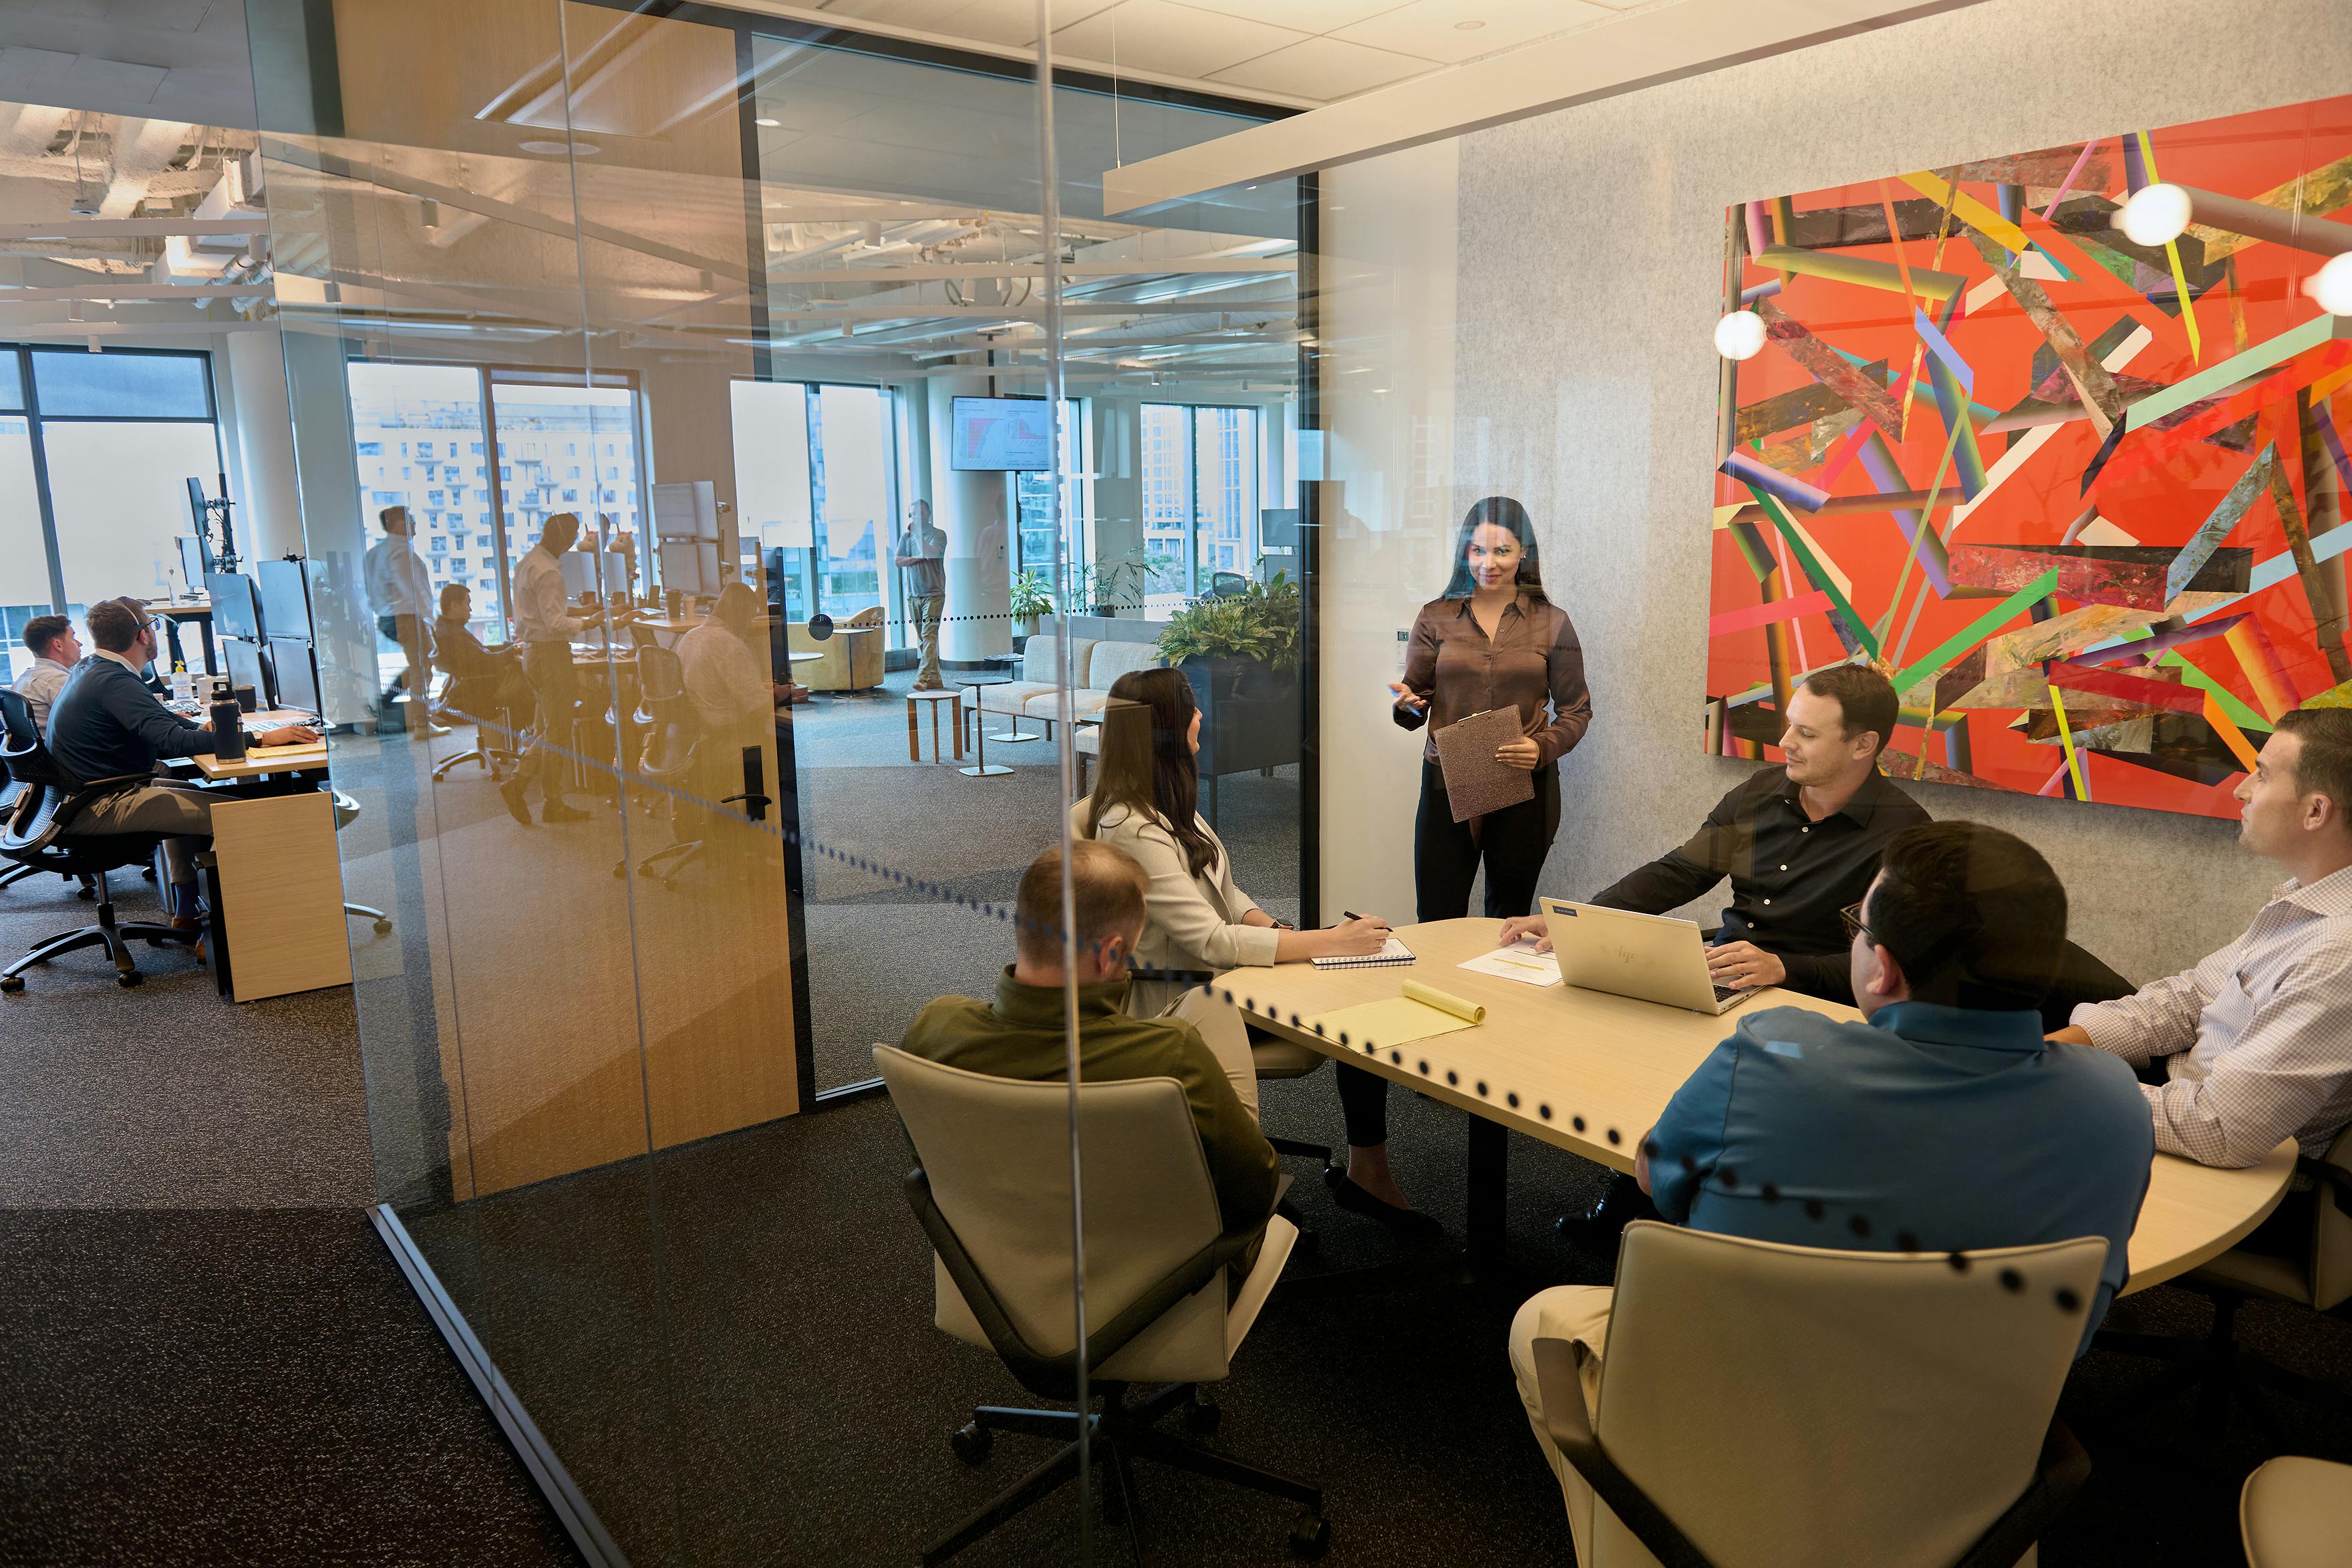 Team meeting and collaborating in a glass office with abstract orange artwork in the background